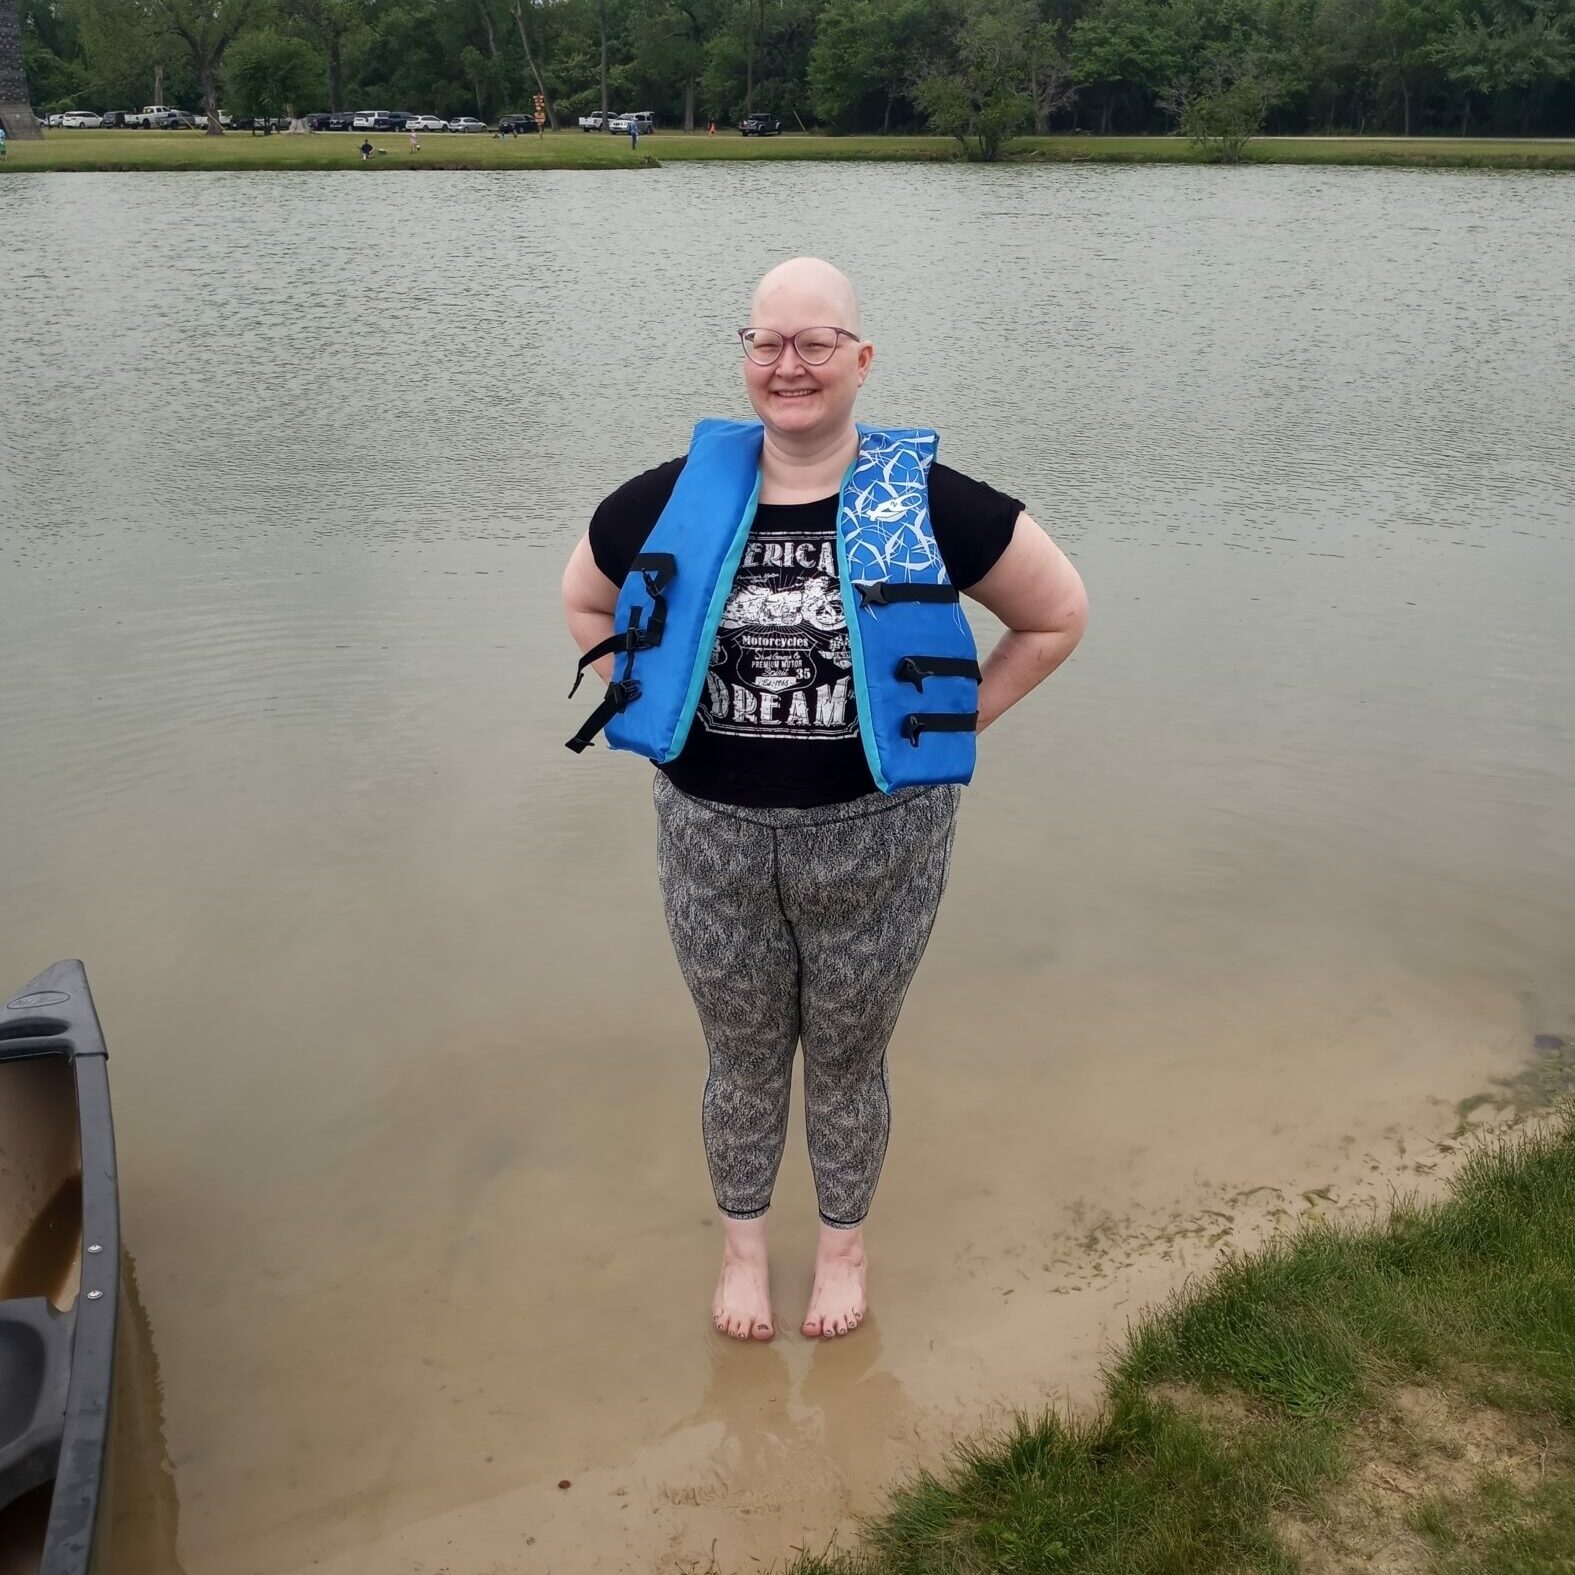 Toni in the lake at Camp Gold 2022.